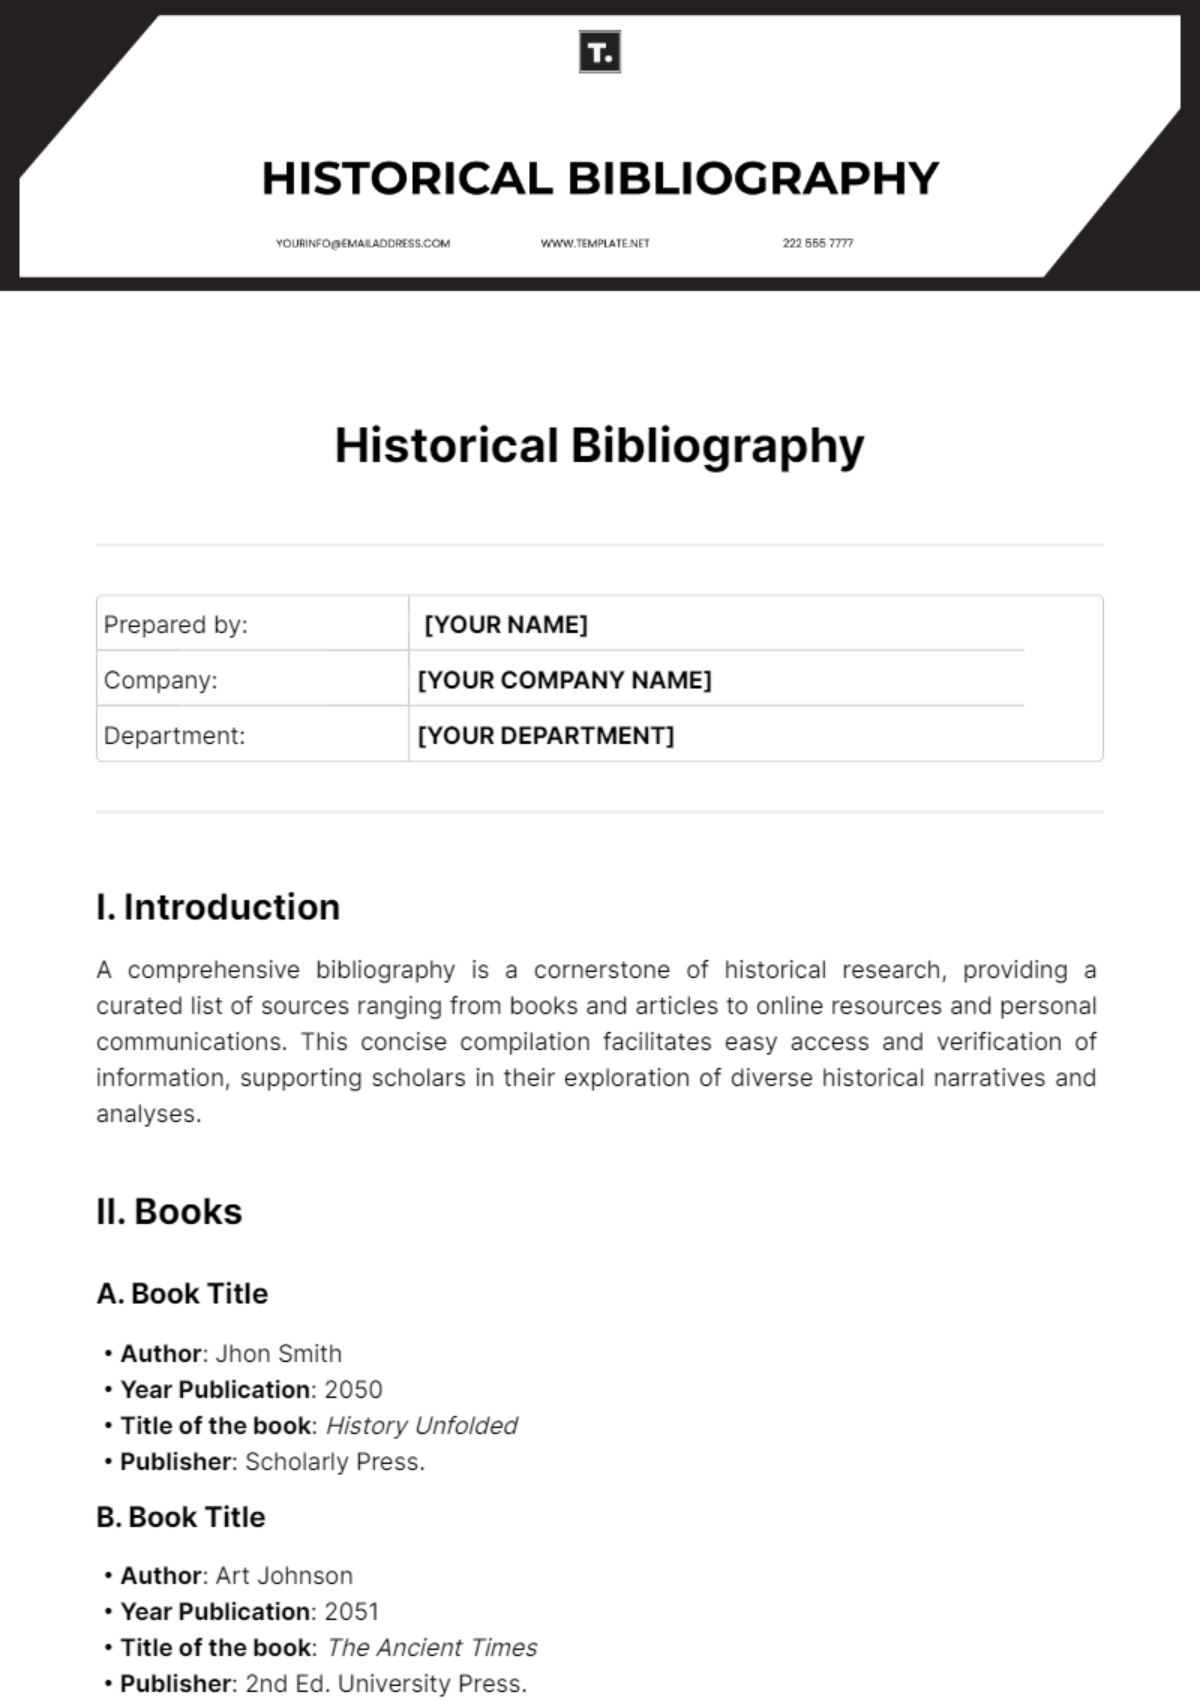 Historical Bibliography Template